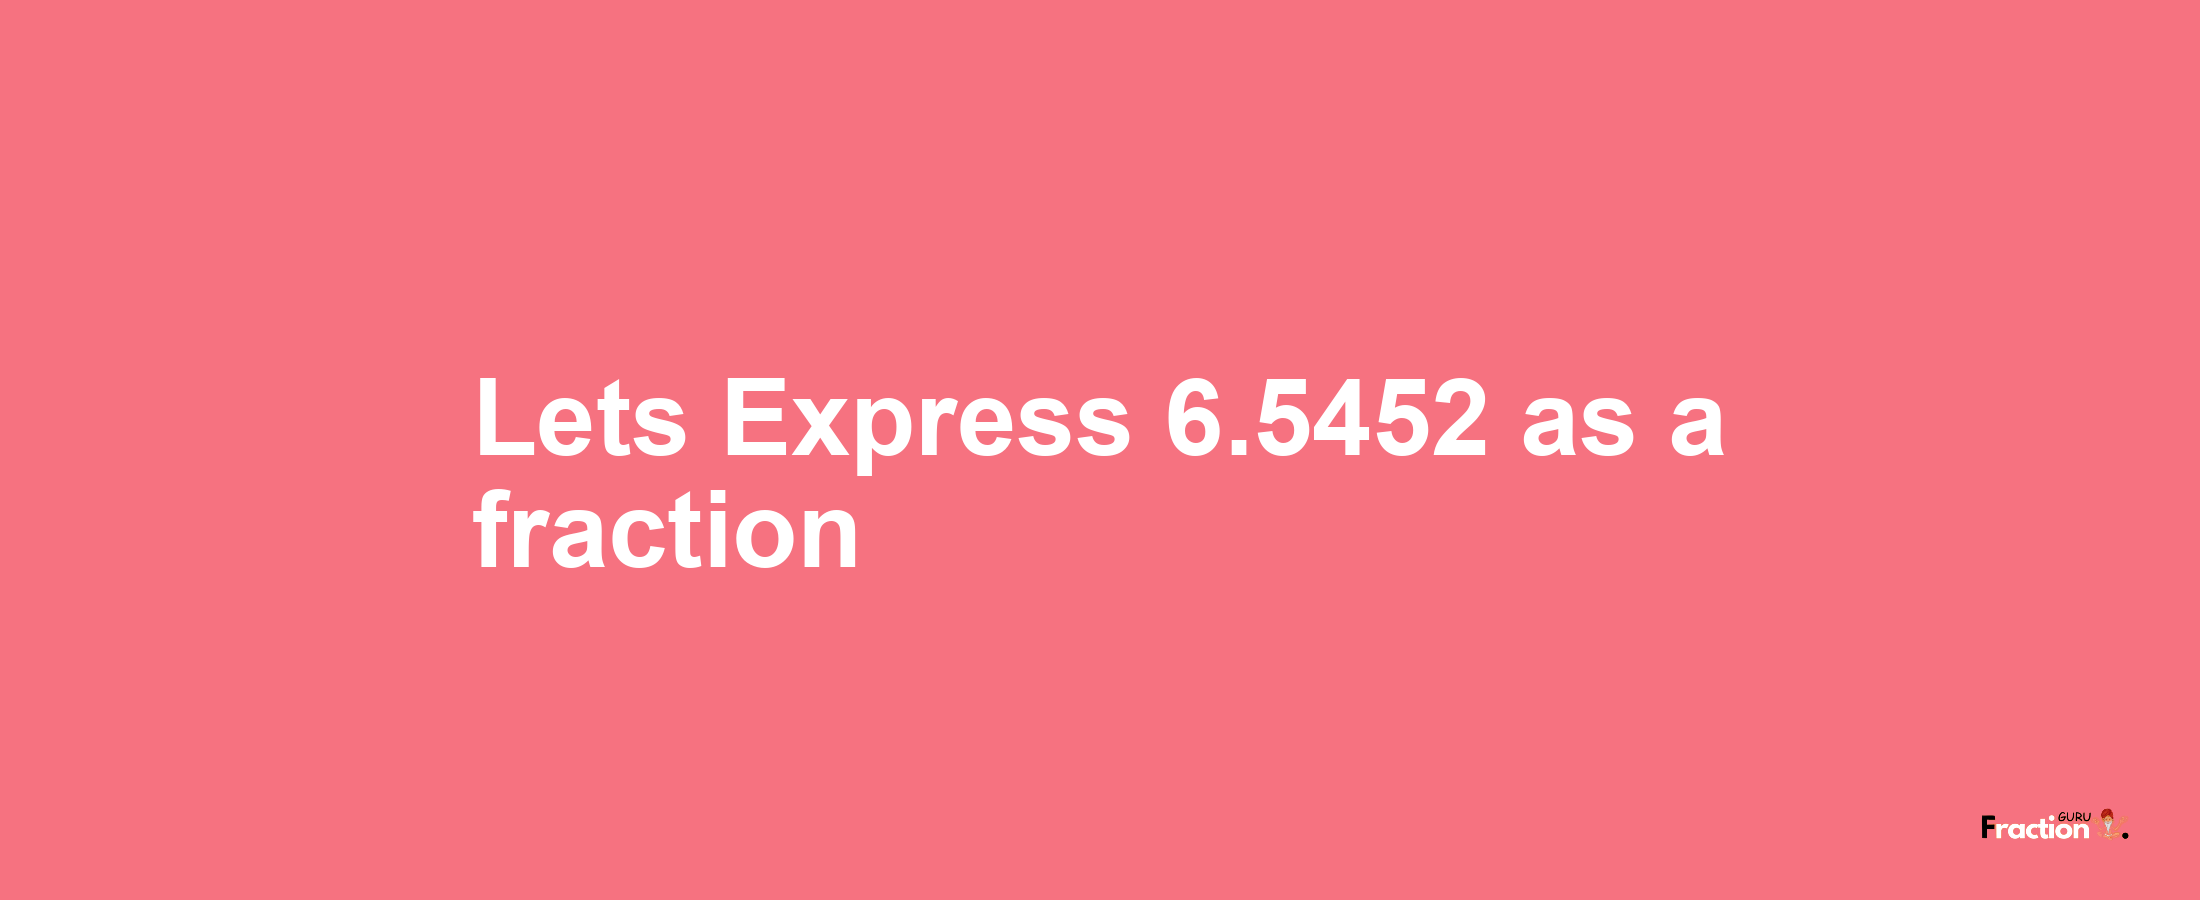 Lets Express 6.5452 as afraction